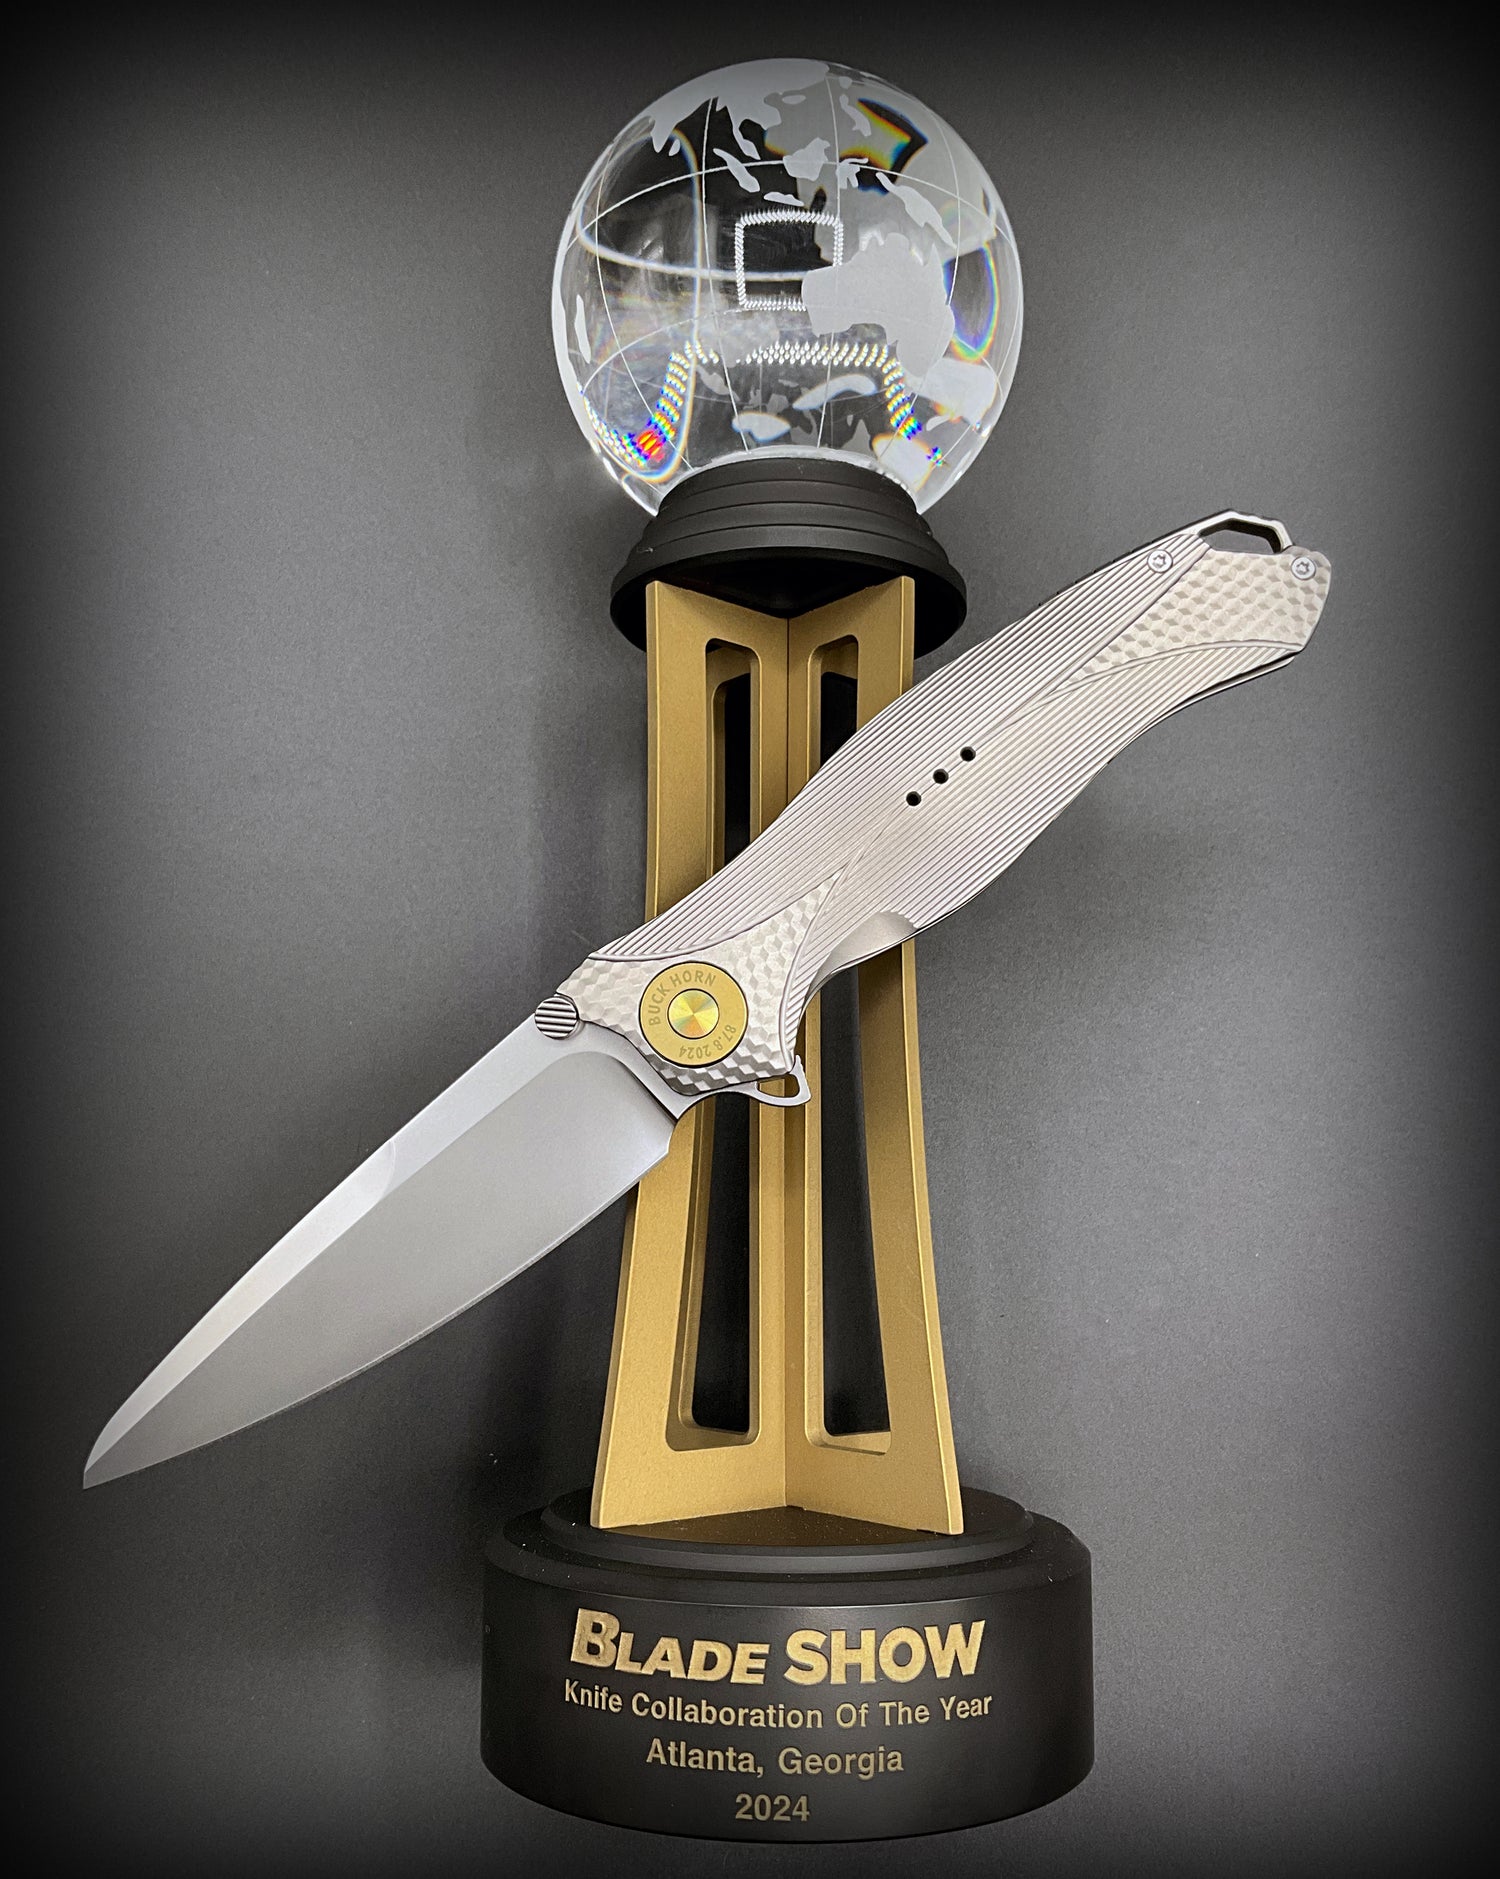 Ketuo USA Triumphs at Blade Show Atlanta 2024, Wins "Knife Collaboration of the Year" for the Buckhorn!